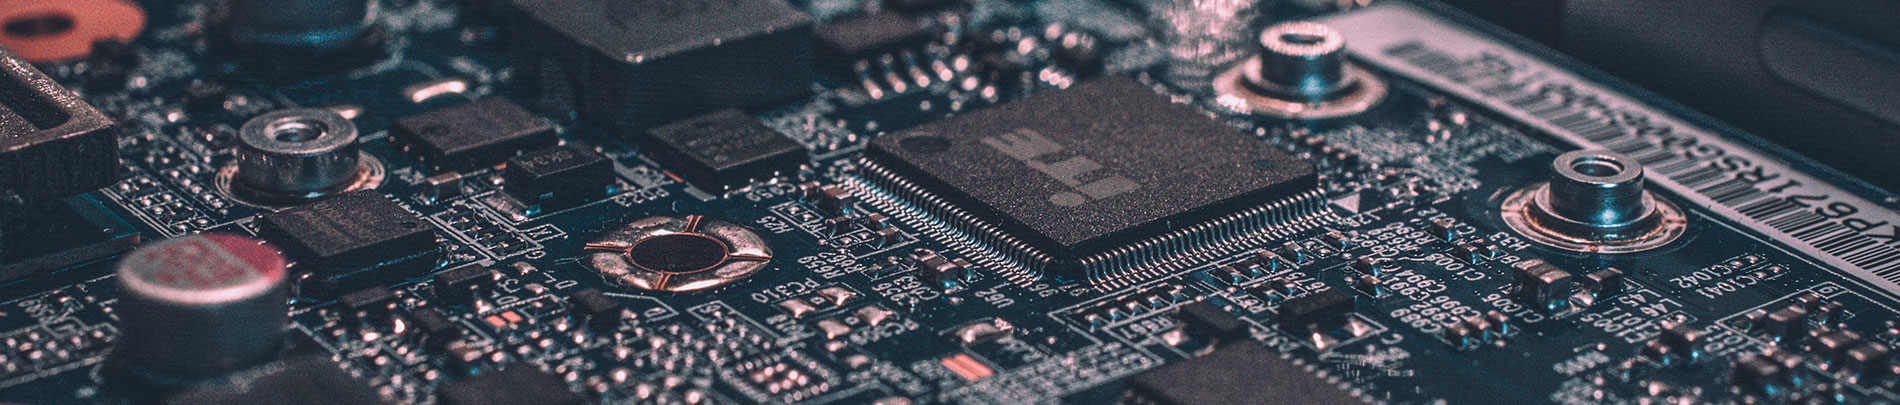 A close up view of a circuit board on a piece of electronics.